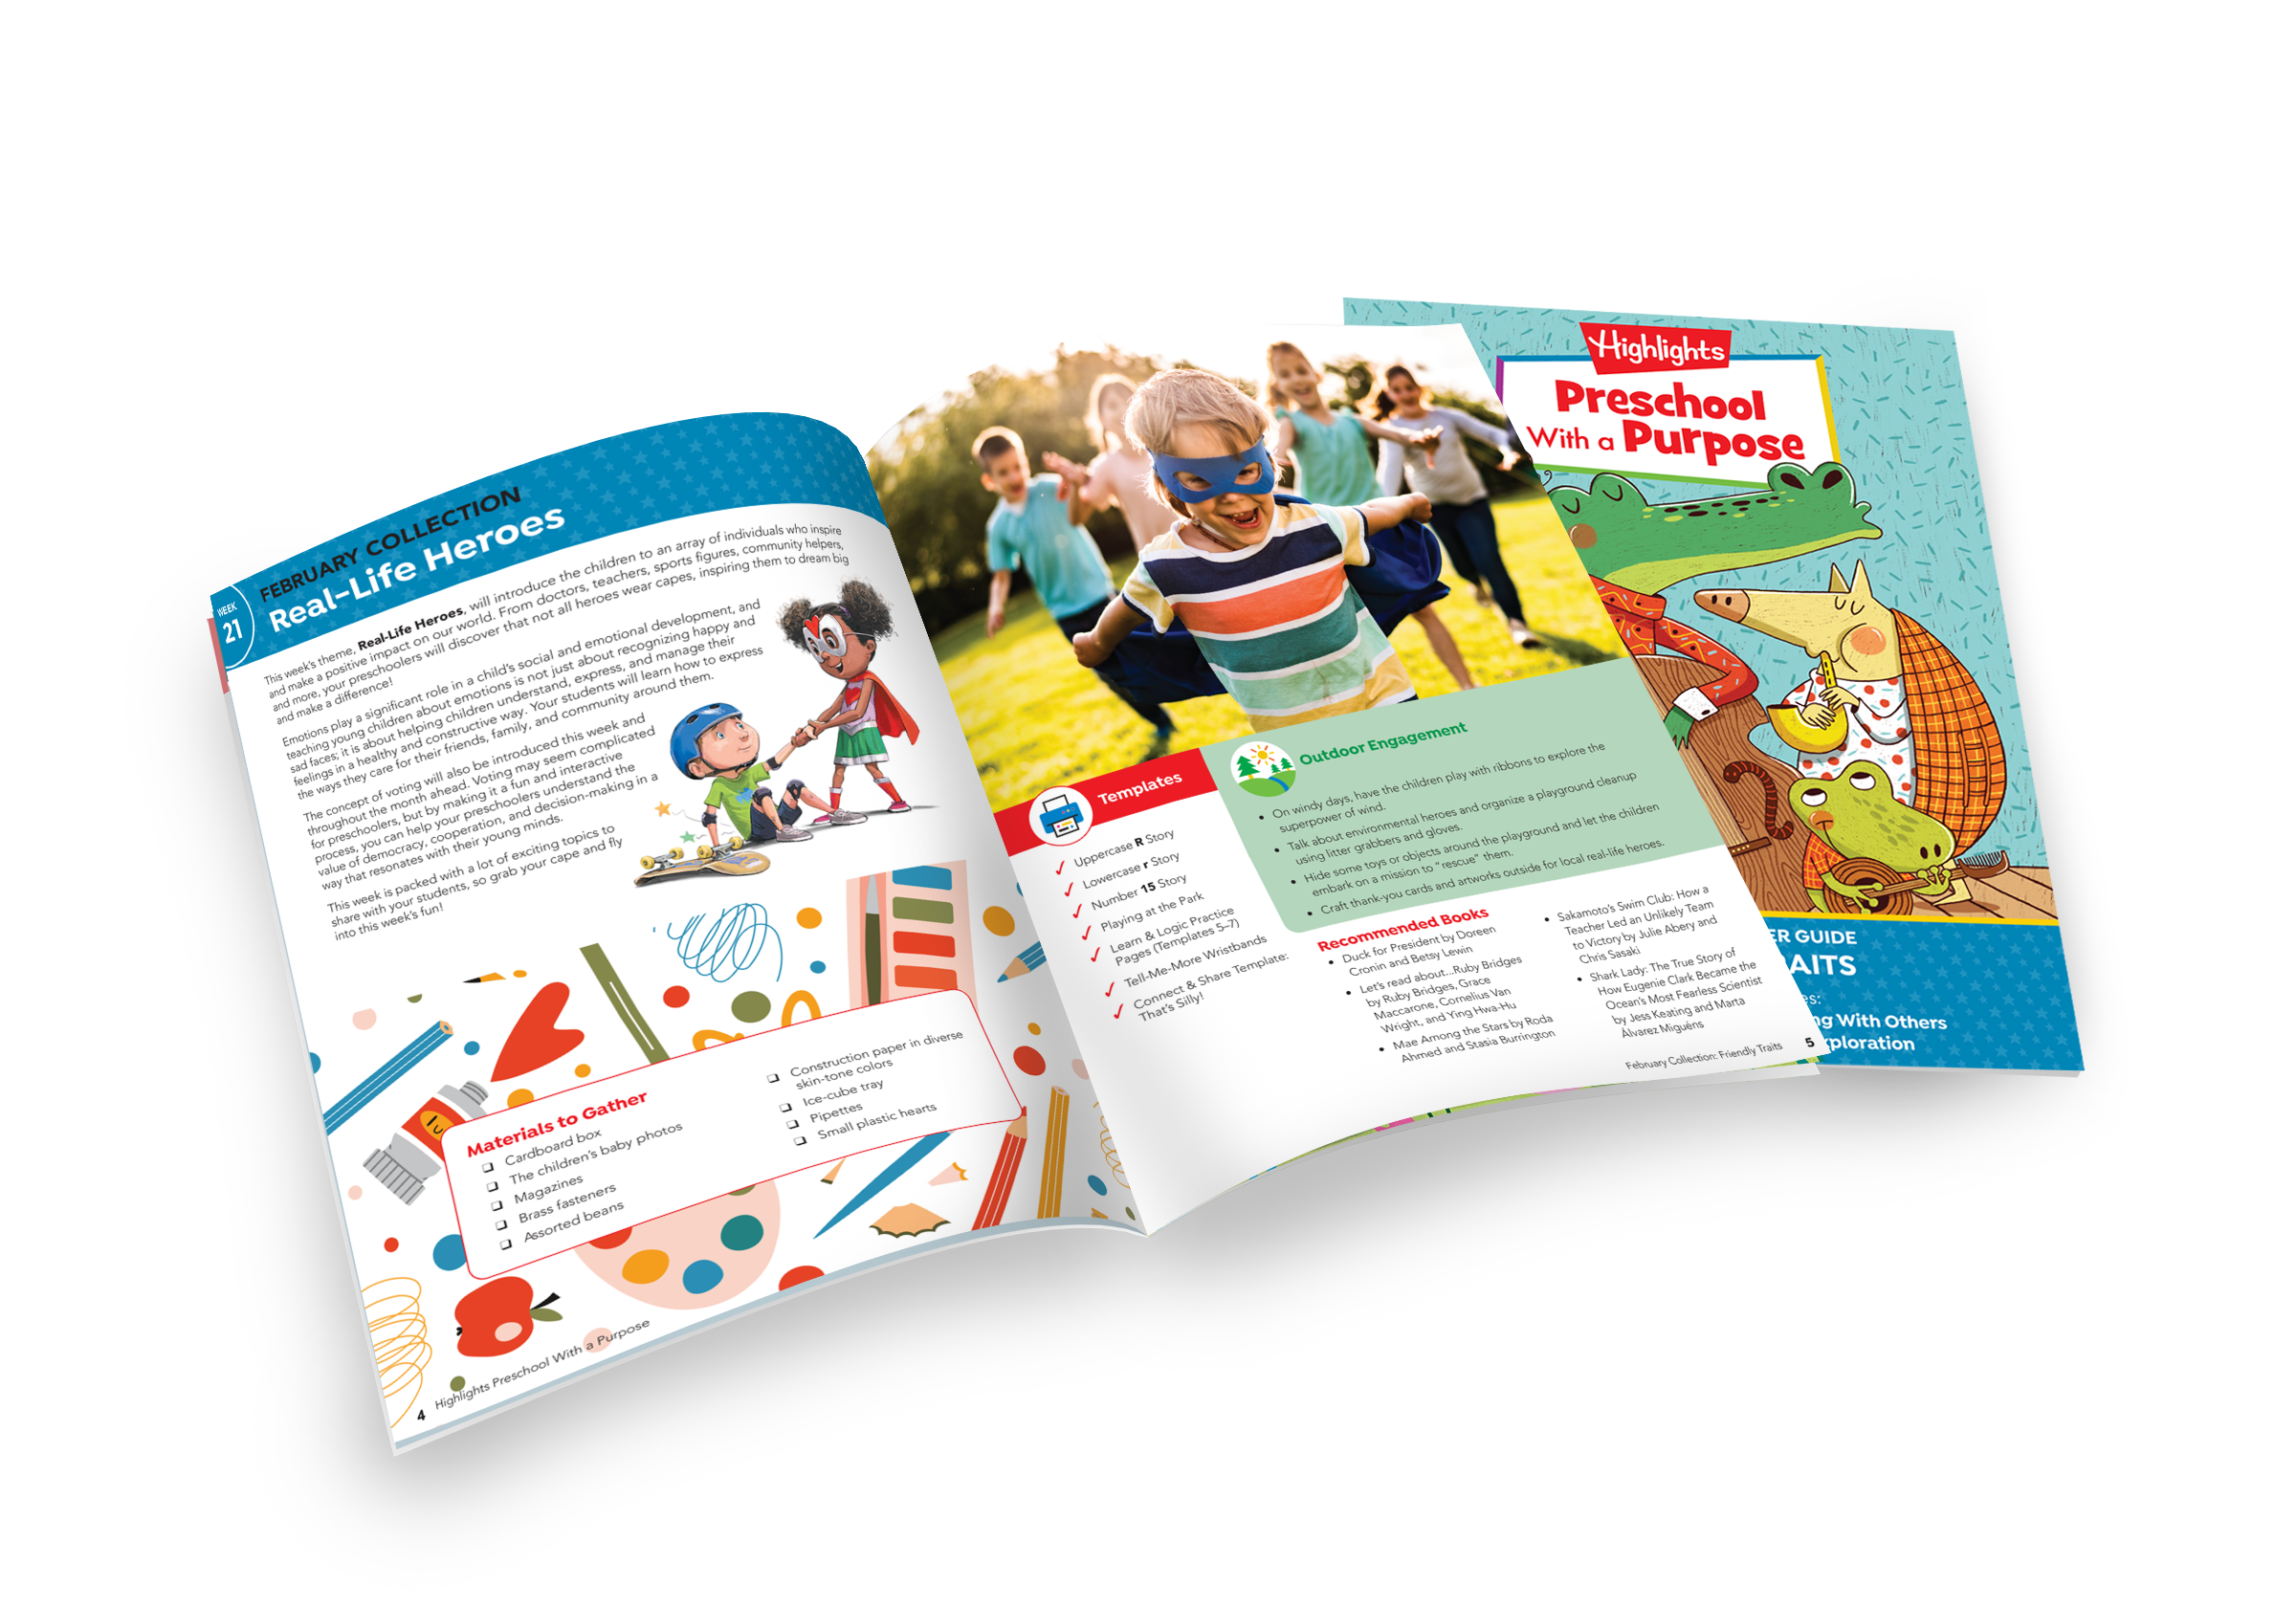 A comprehensive monthly teacher guidebook open, featuring step-by-step lesson plans, core topics, and a variety of activities for the preschool curriculum. Open page features an image of a preschooler engaging in imaginative play in a superhero costume.